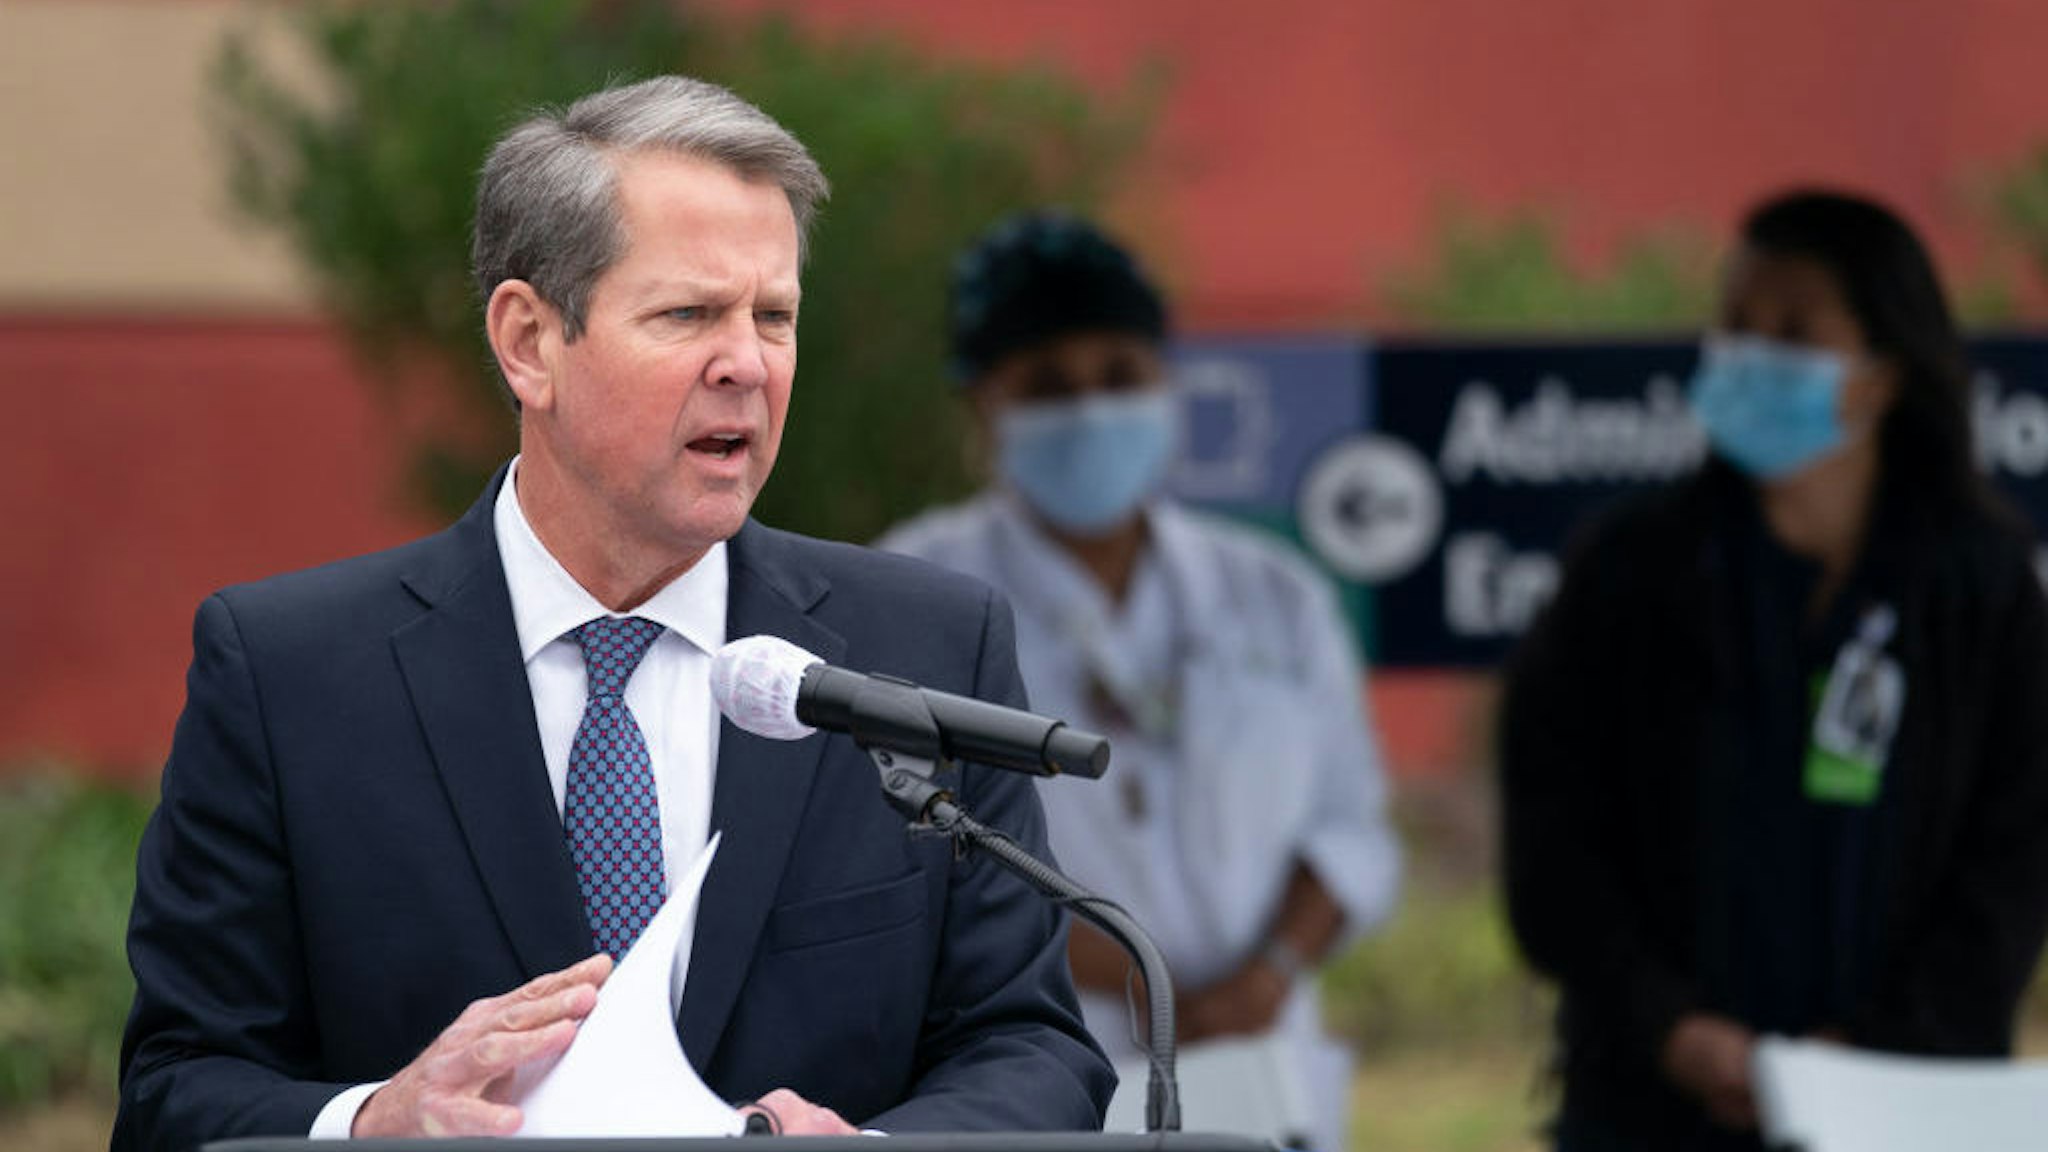 SAVANNAH, GA - DECEMBER 15: Georgia Gov. Brian Kemp speaks to the media before health care workers receive the Pfizer-BioNTech COVID-19 vaccine outside of the Chatham County Health Department on December 15, 2020 in Savannah, Georgia. Kemp was on hand to witness initial administering of vaccines in the state. (Photo by Sean Rayford/Getty Images)